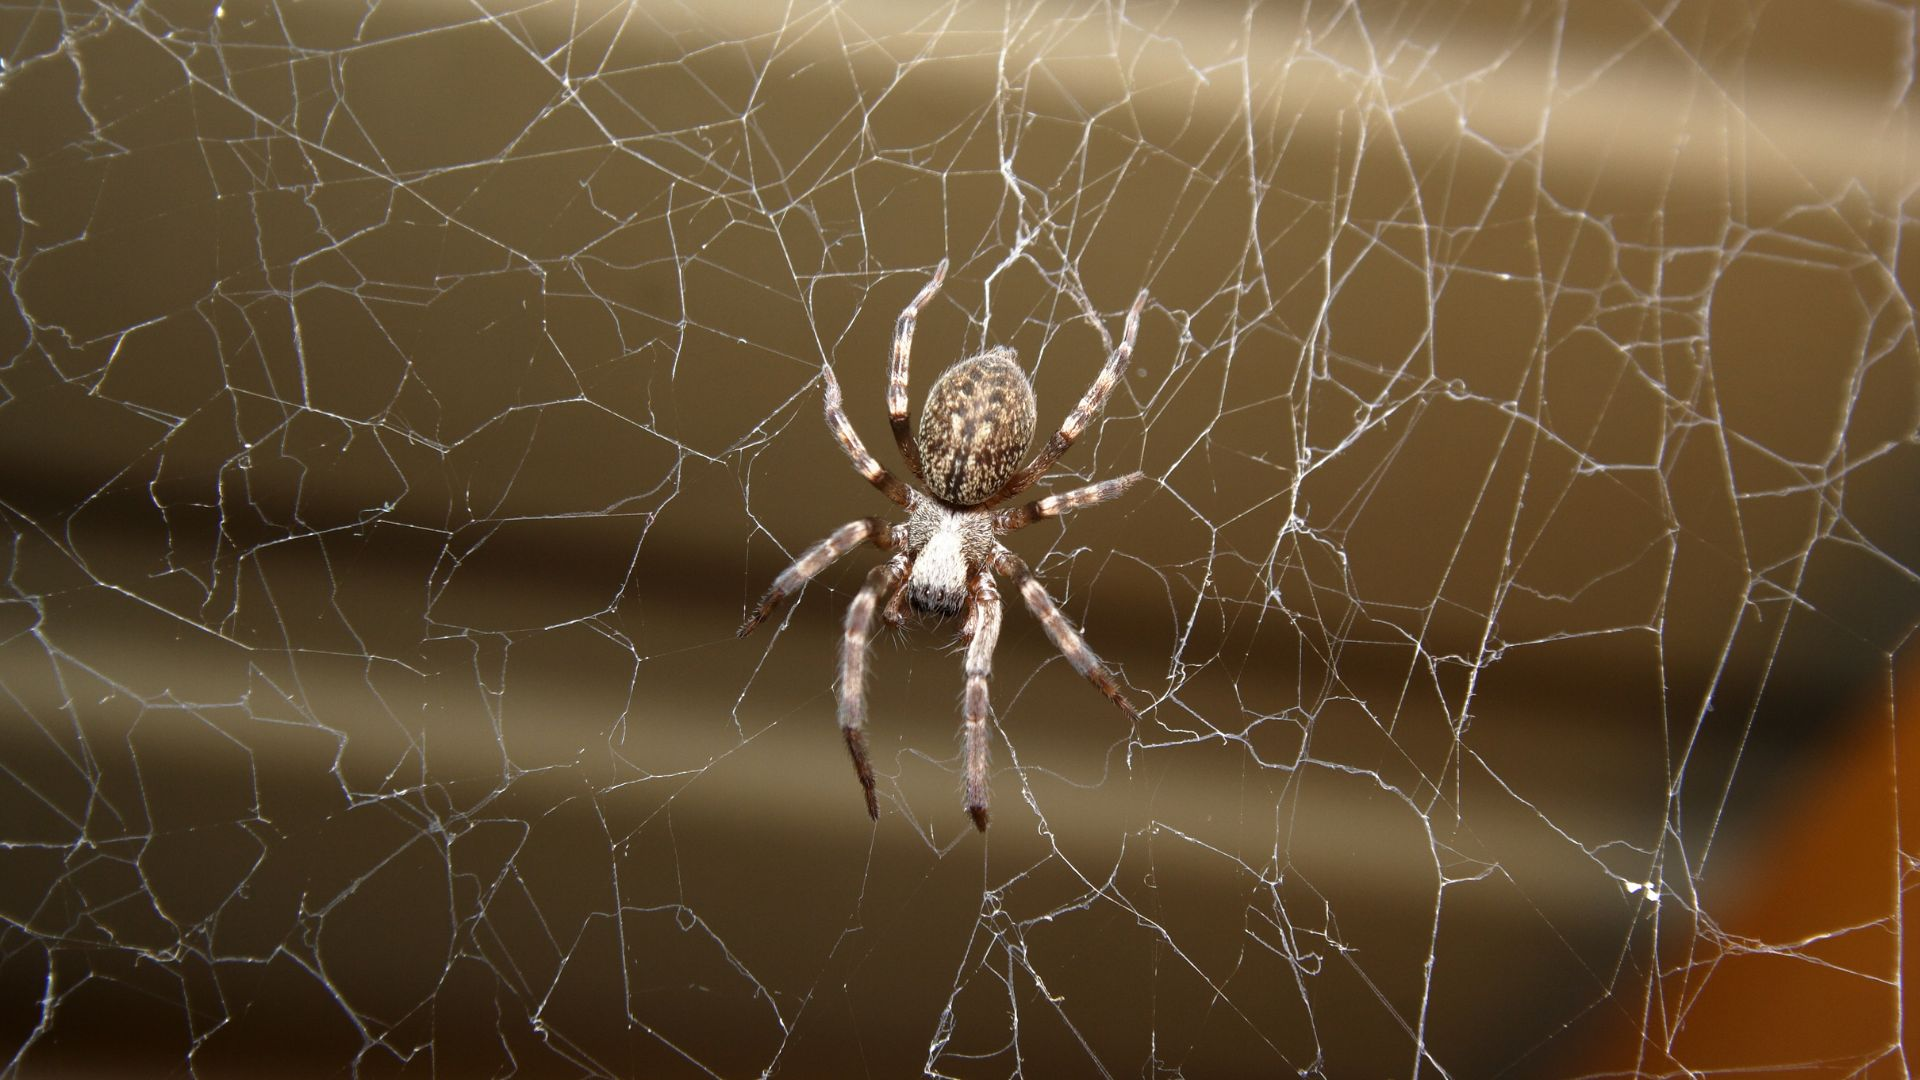 An image of spider resting on a cobweb.